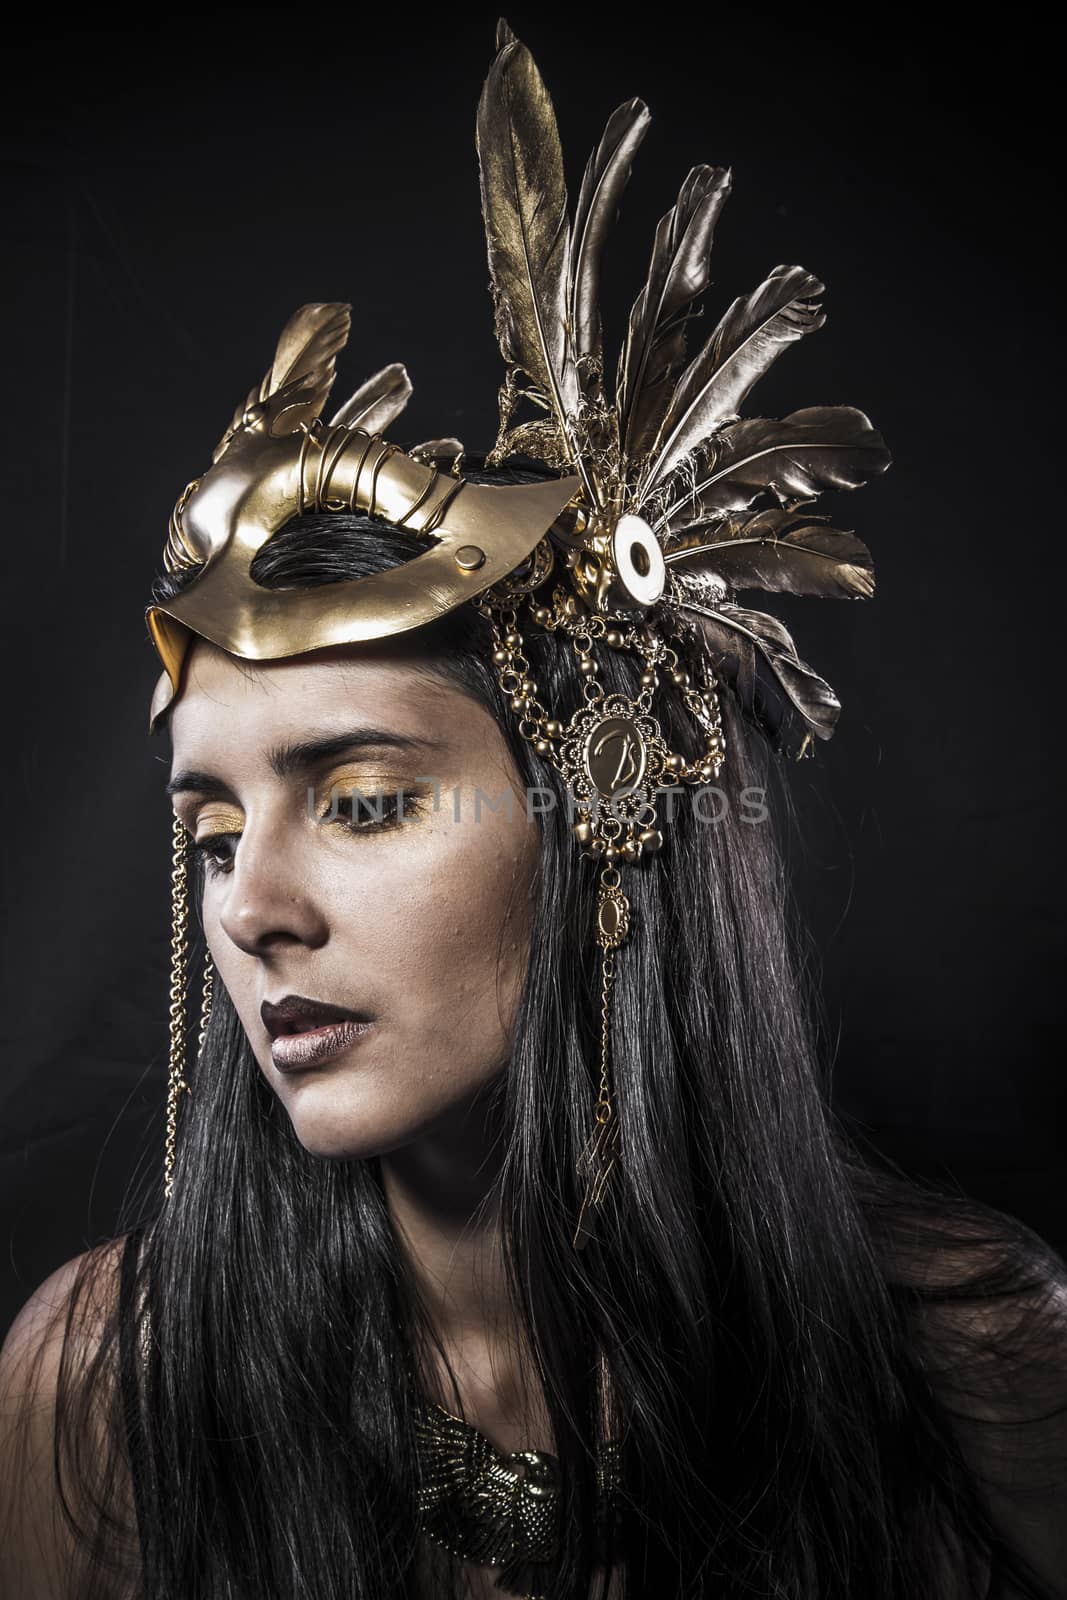 Cosmetic, ensual young woman with golden mask jewelry by FernandoCortes